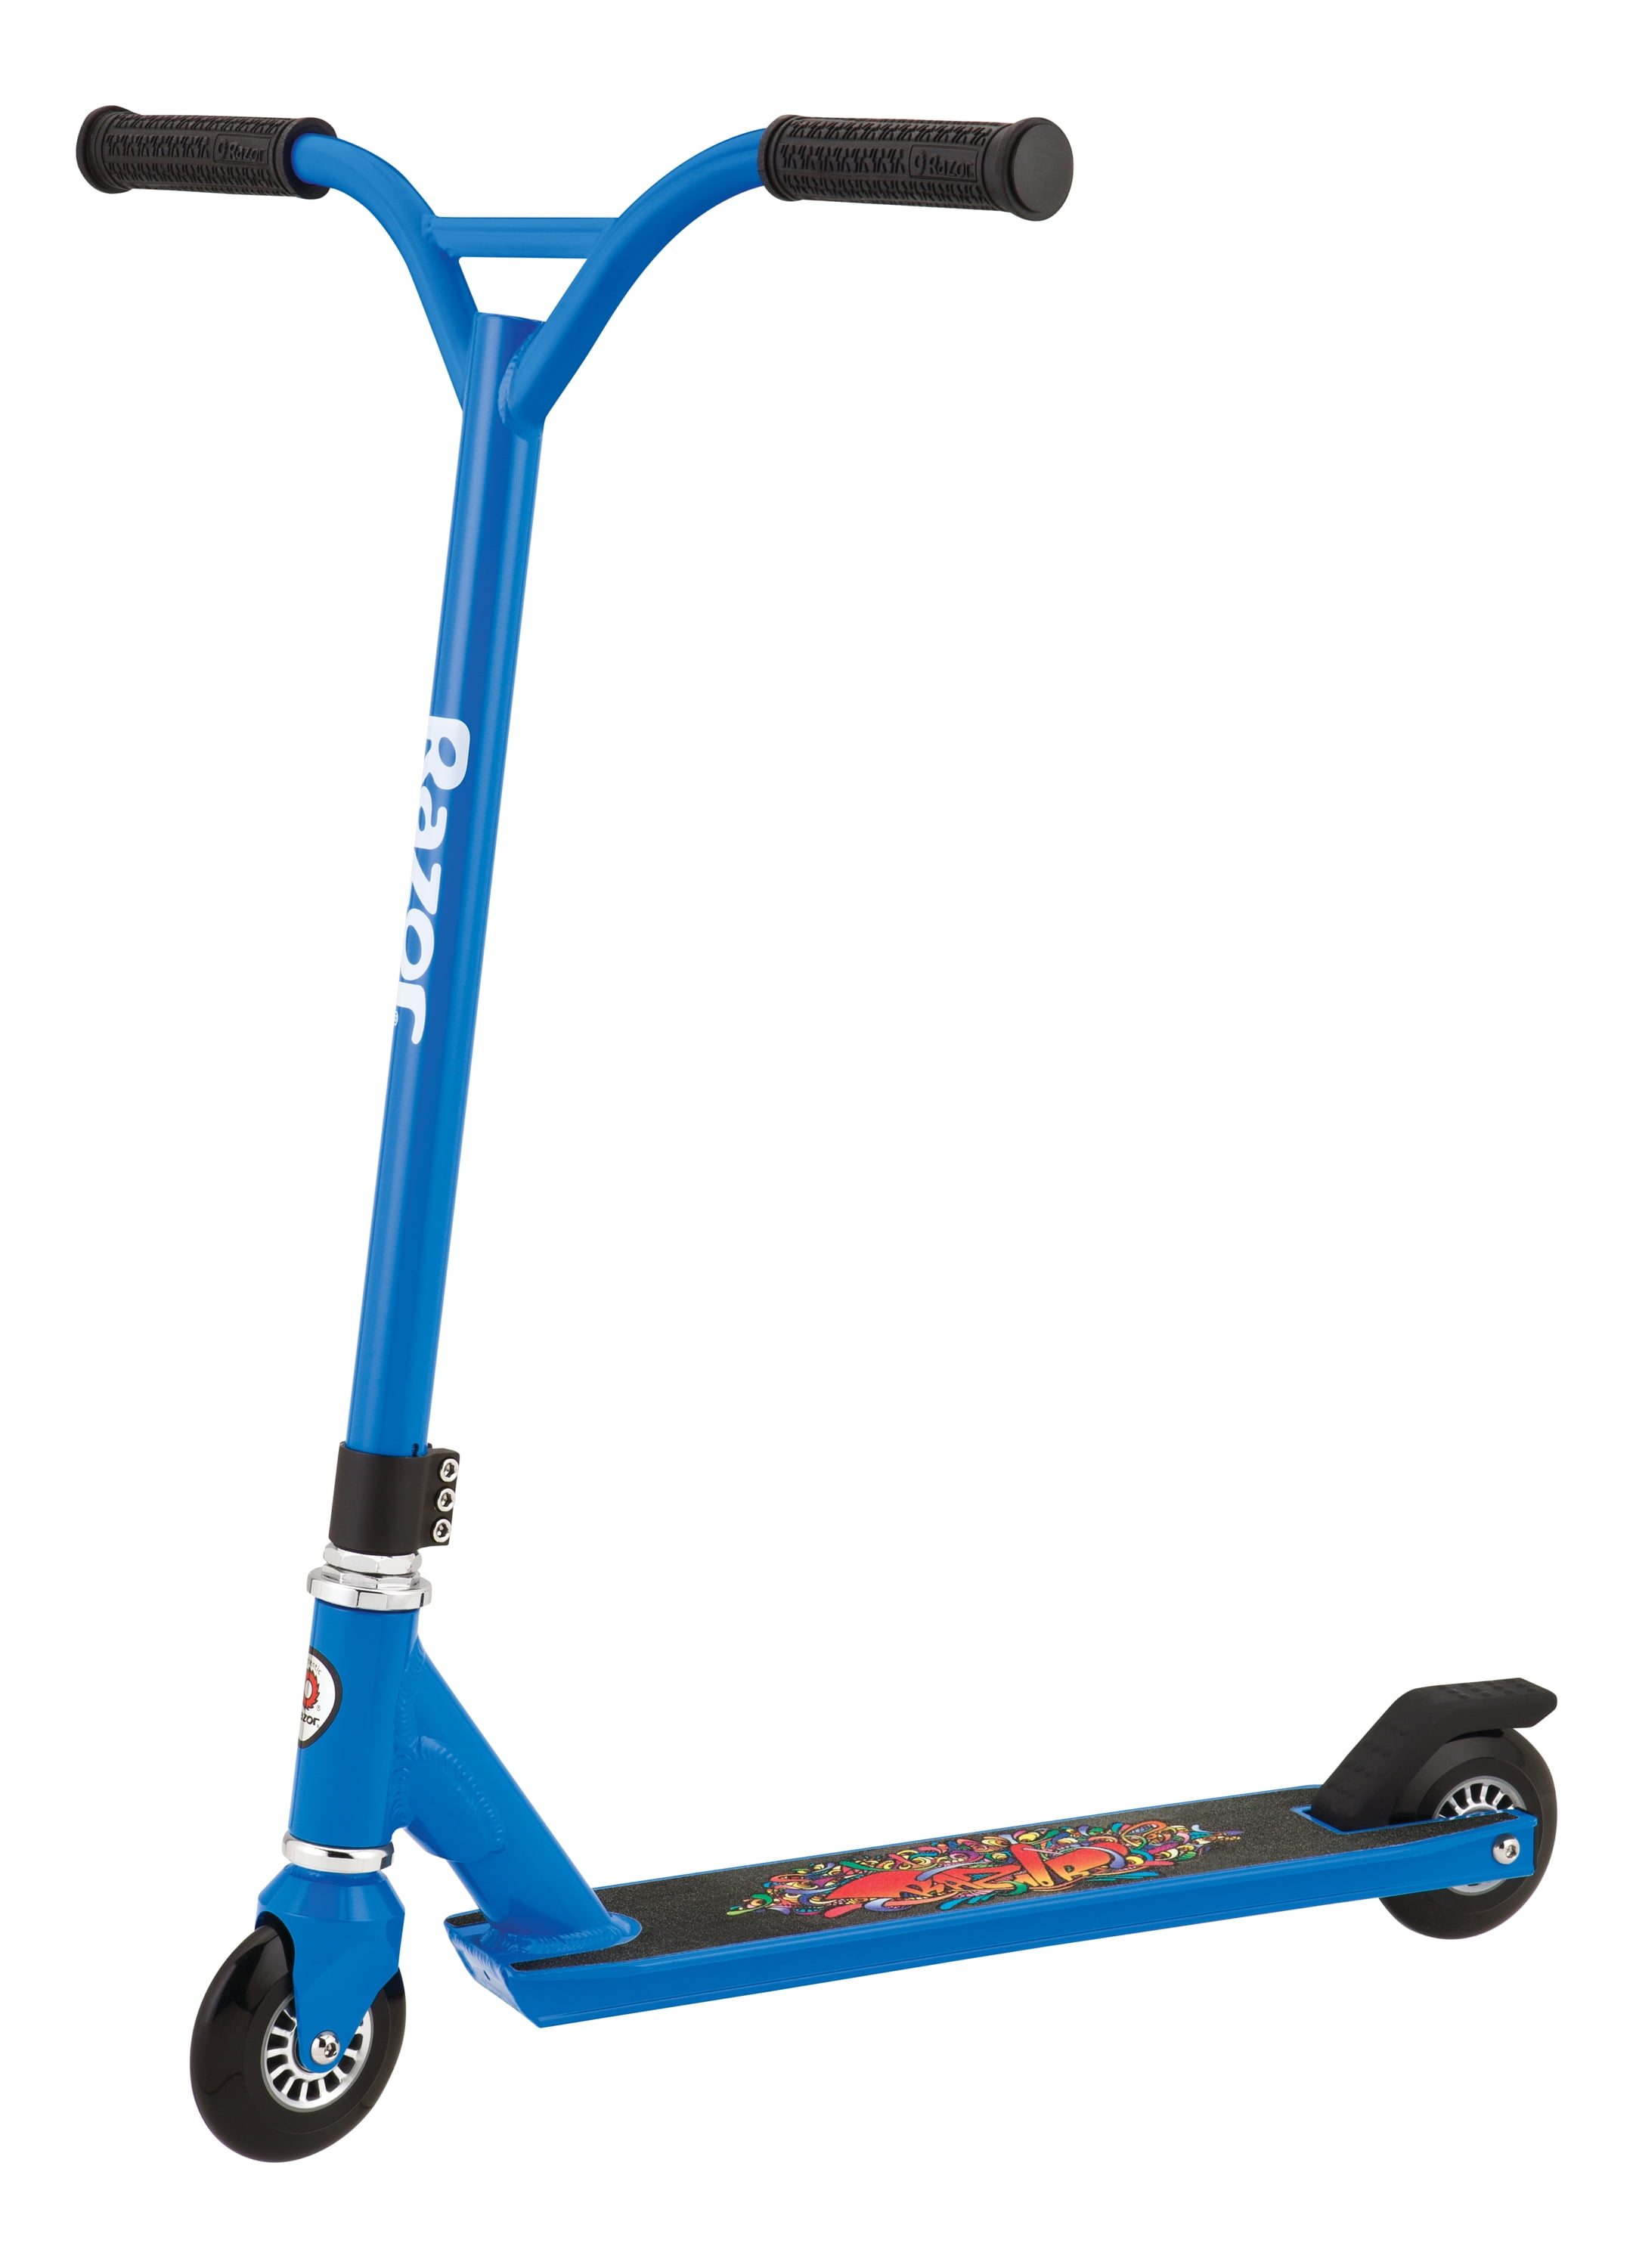 Fuzion Pro x-3 Kick Scooters for Kids 7 Years and up Boys and 